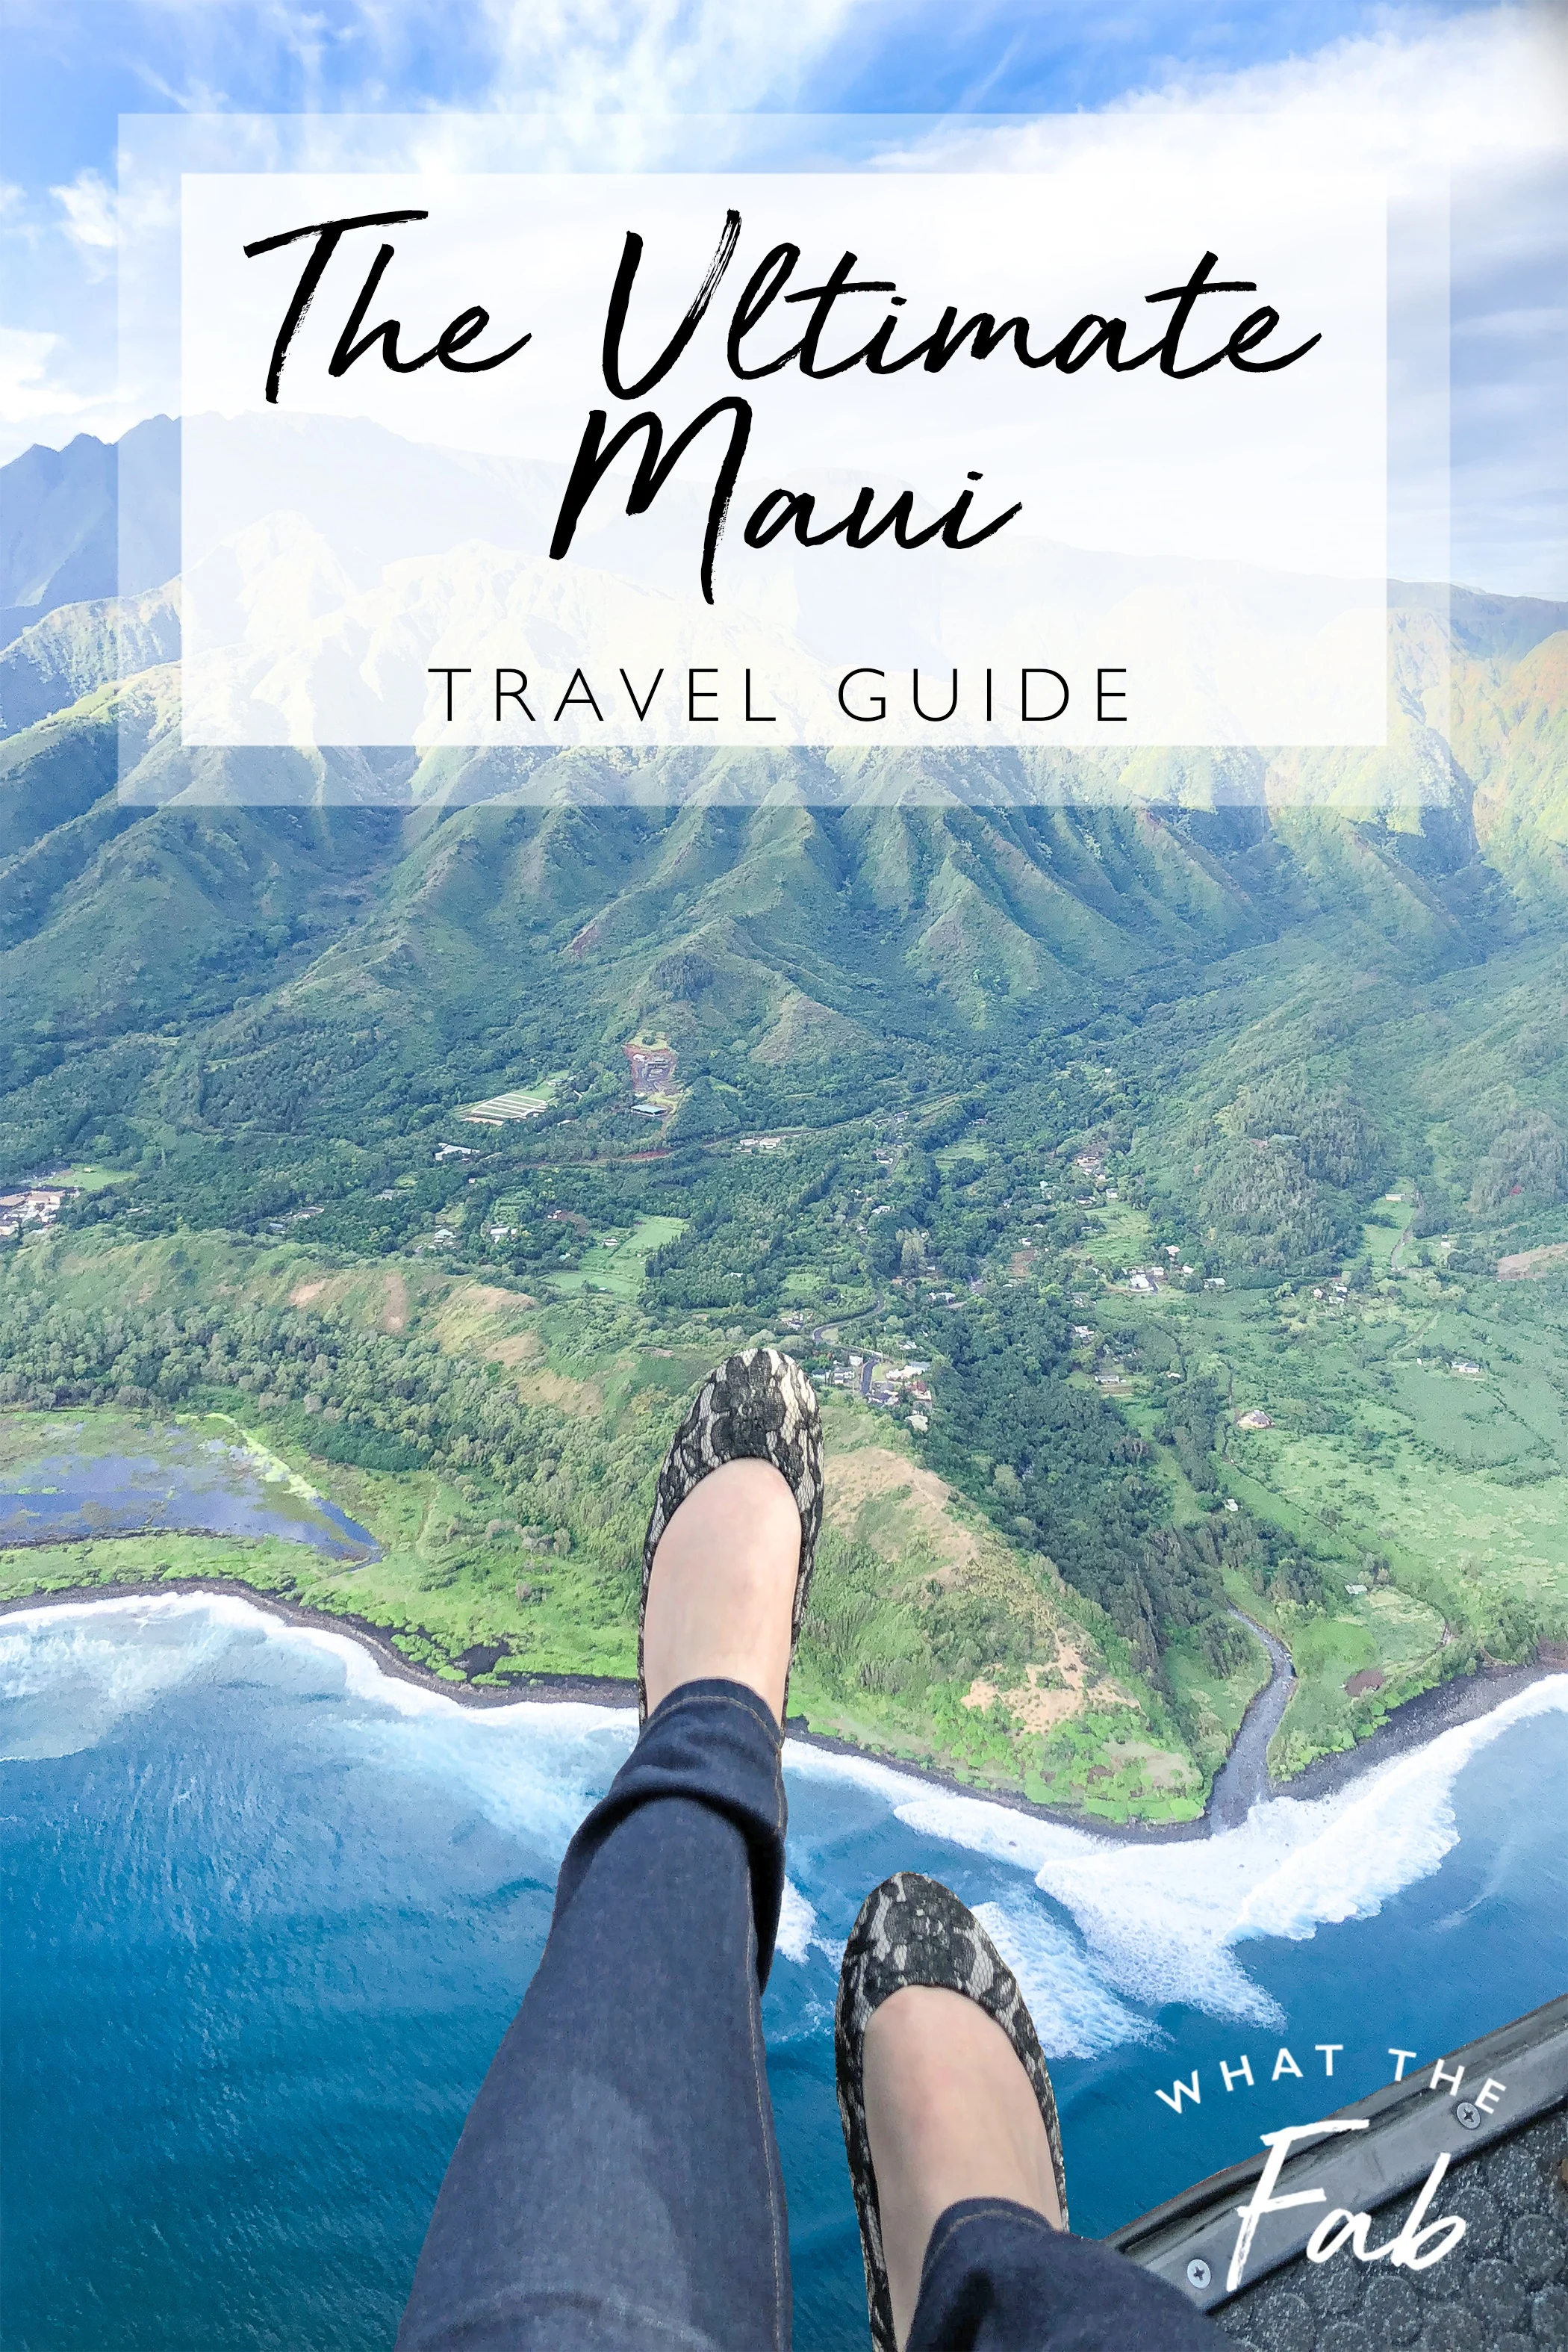 Hawaiian Paradise Park Travel Guide 2023 - Things to Do, What To Eat & Tips